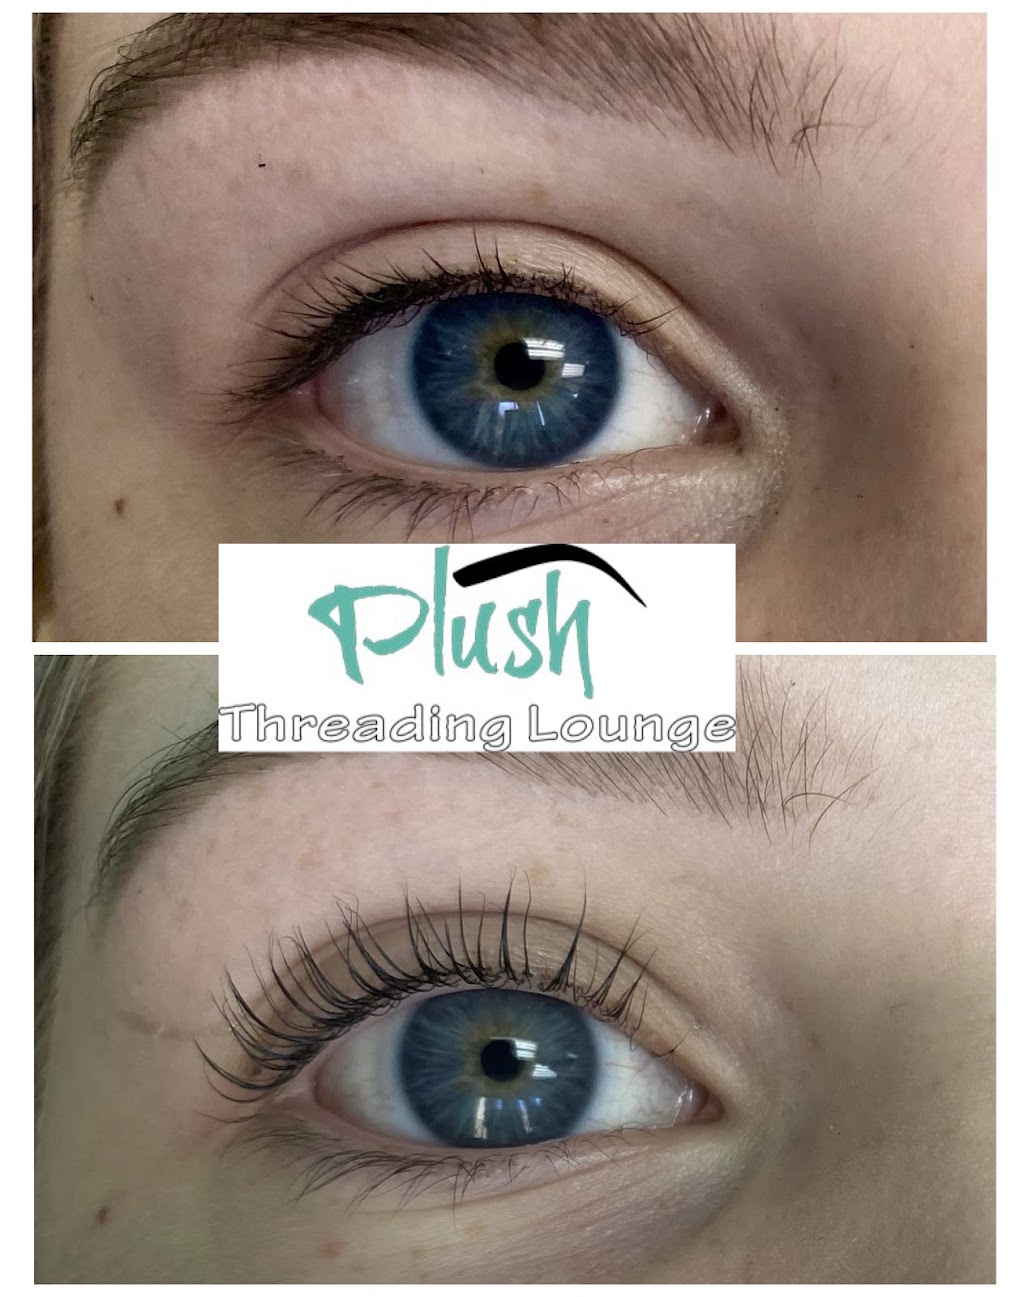 Plush Threading Lounge | 15853 N Fwy Inside Tanger outlets, #150, Fort Worth, TX 76177, USA | Phone: (817) 204-0040